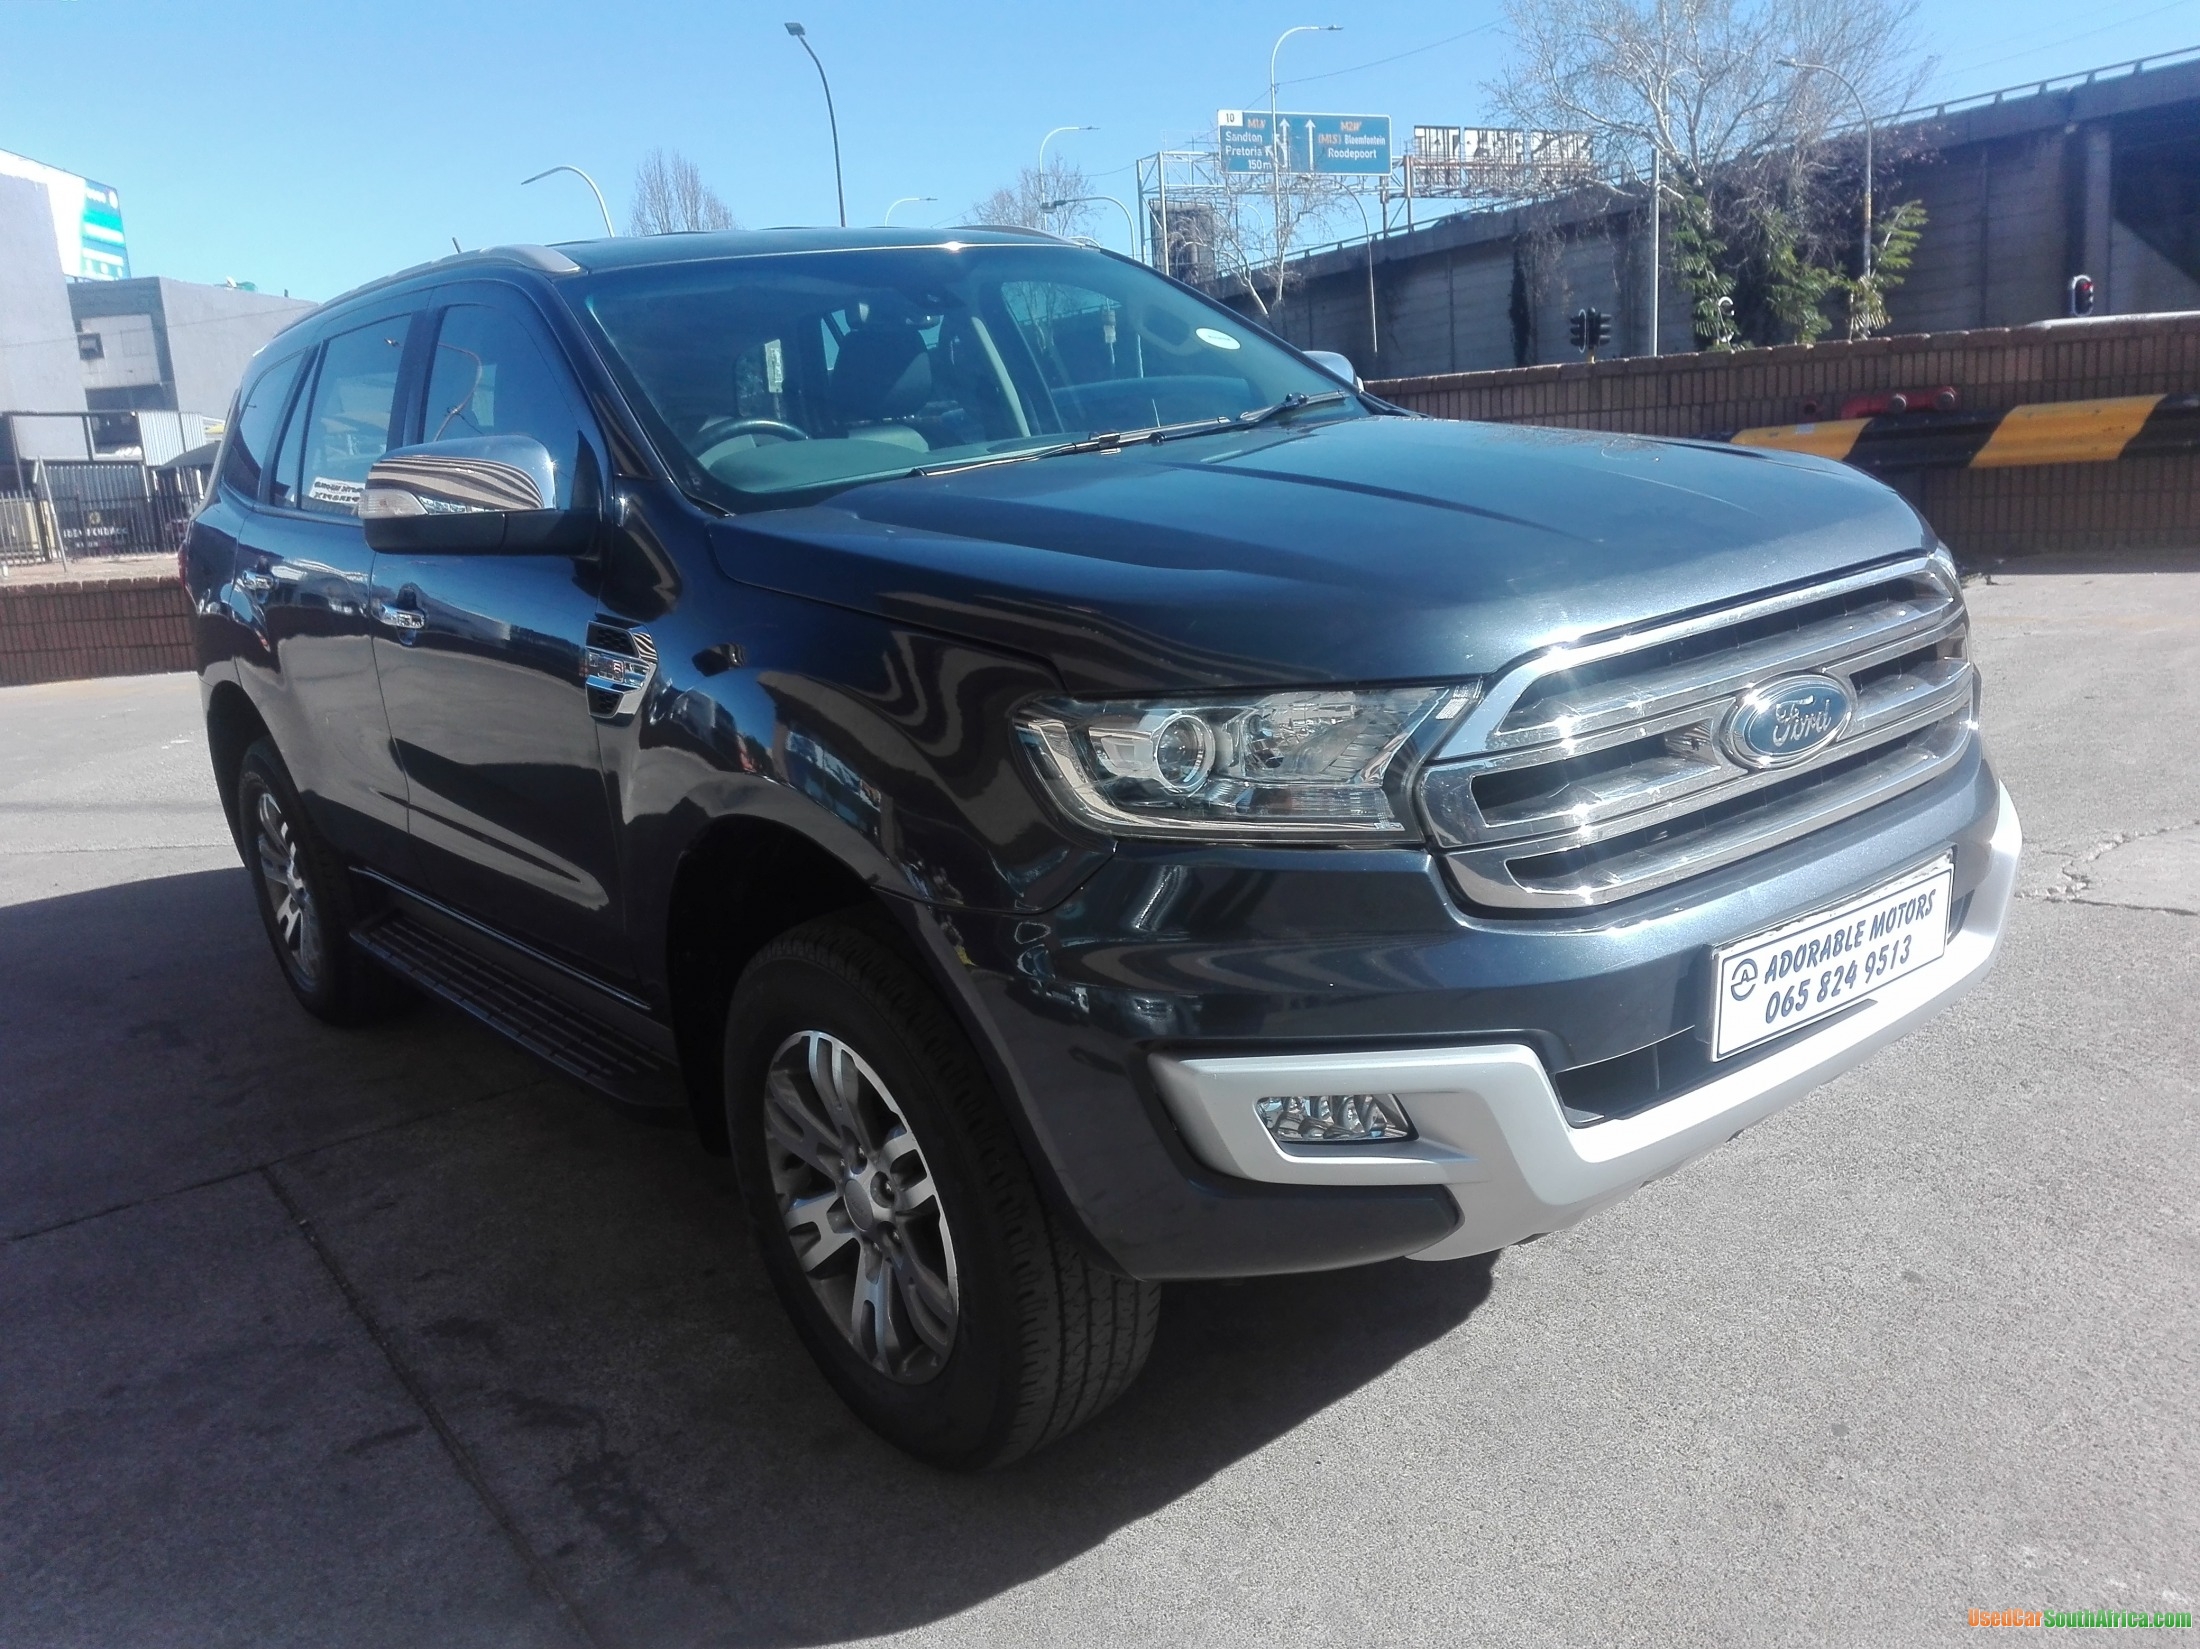 2018 Ford Everest 2.2 6speed used car for sale in Johannesburg City Gauteng South Africa - OnlyCars.co.za